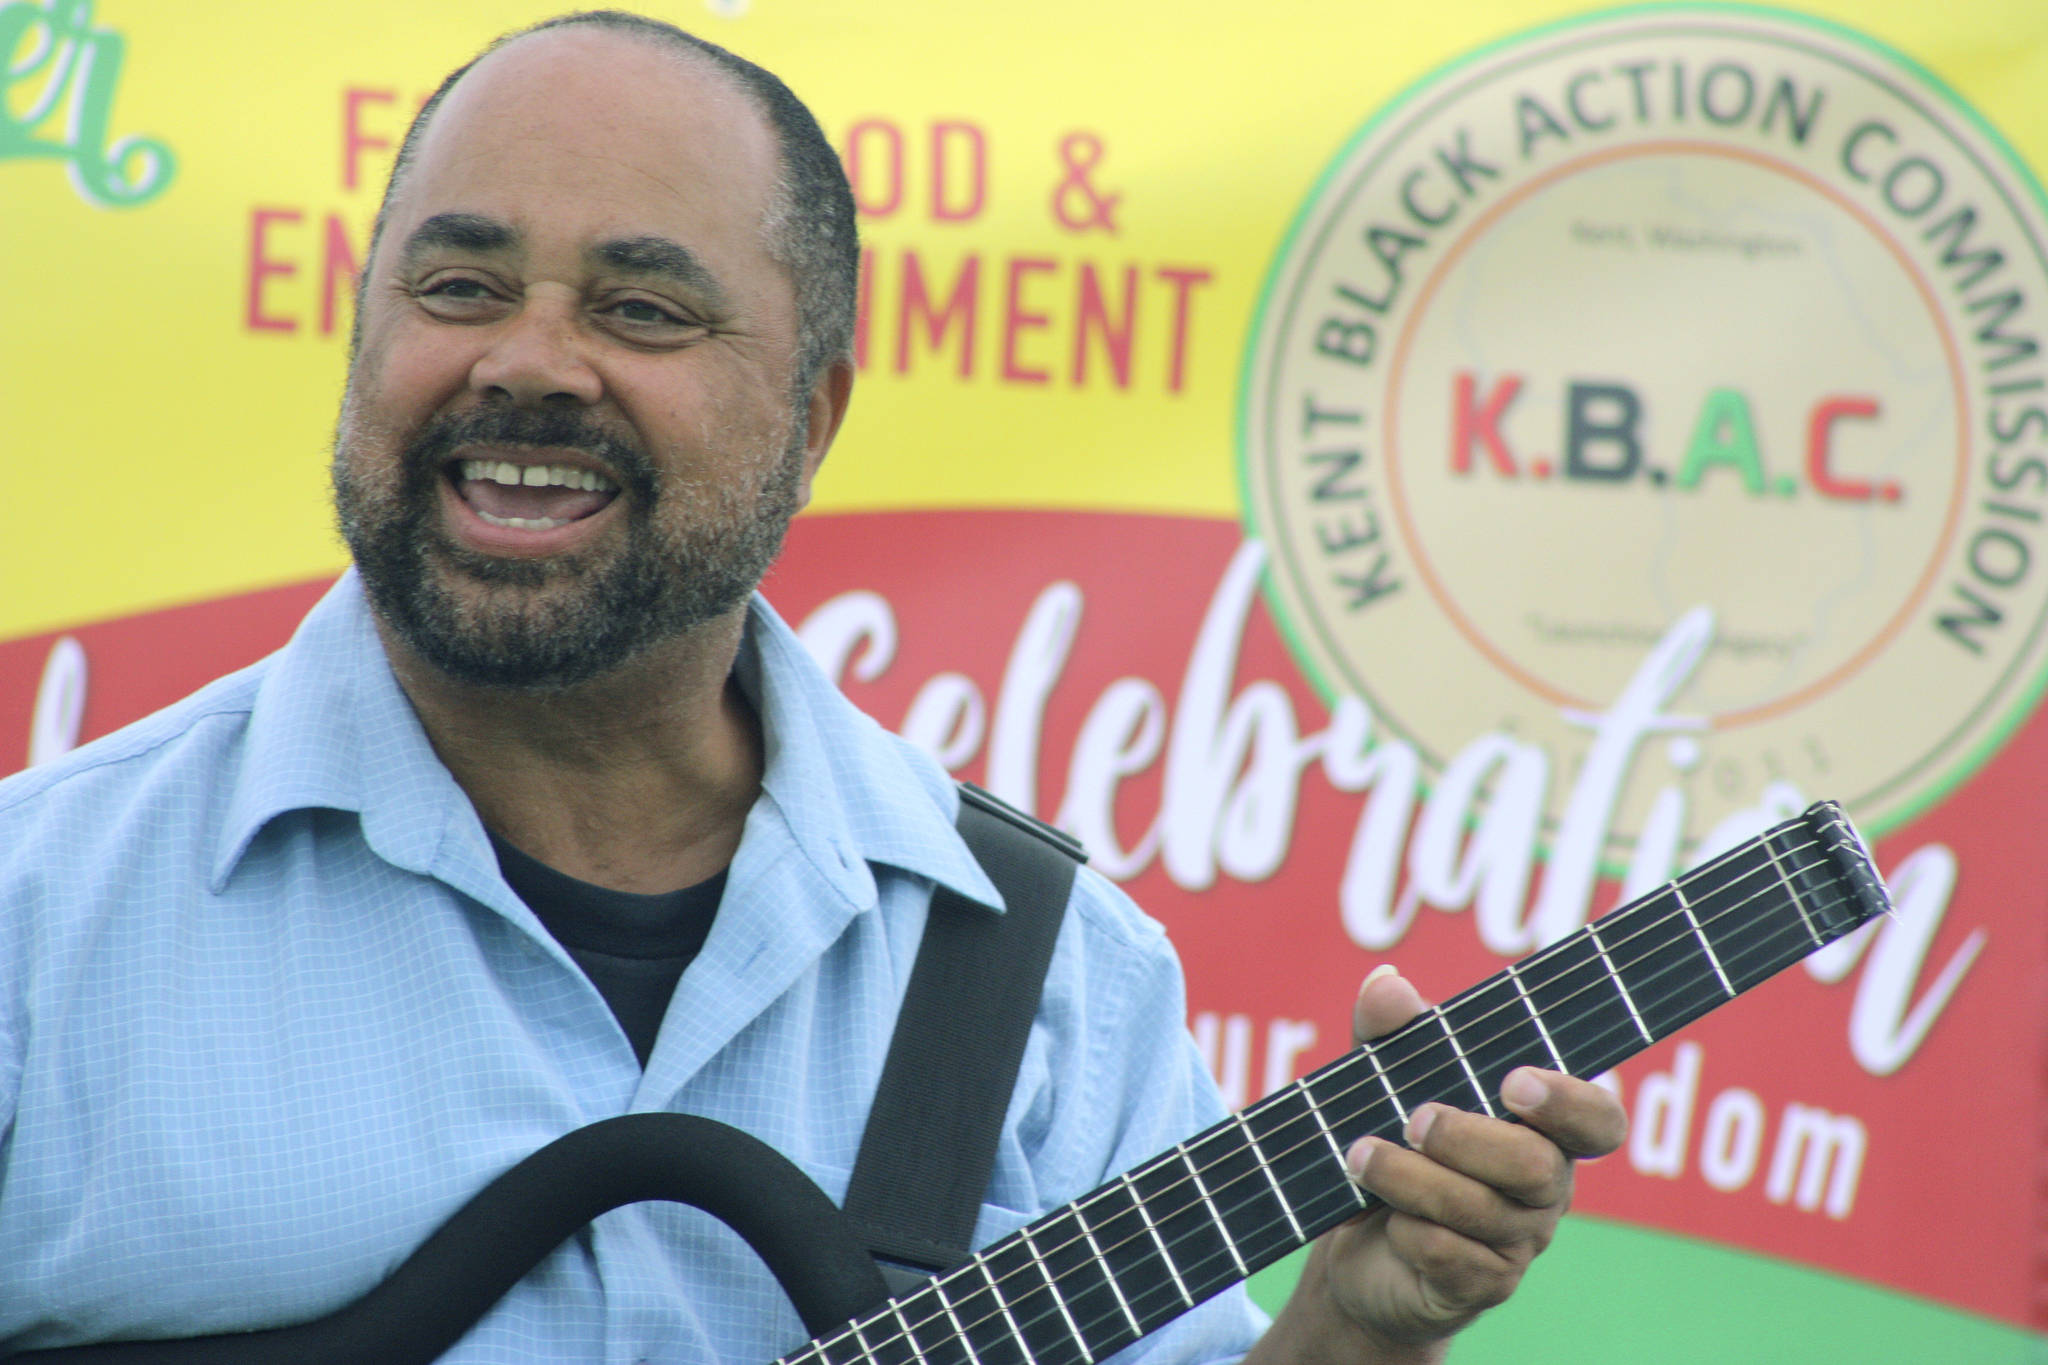 Jazz guitarist Michael Powers cranks up the music from center stage during the Juneteenth celebration at Morrill Meadows Park. MARK KLAAS, Kent Reporter